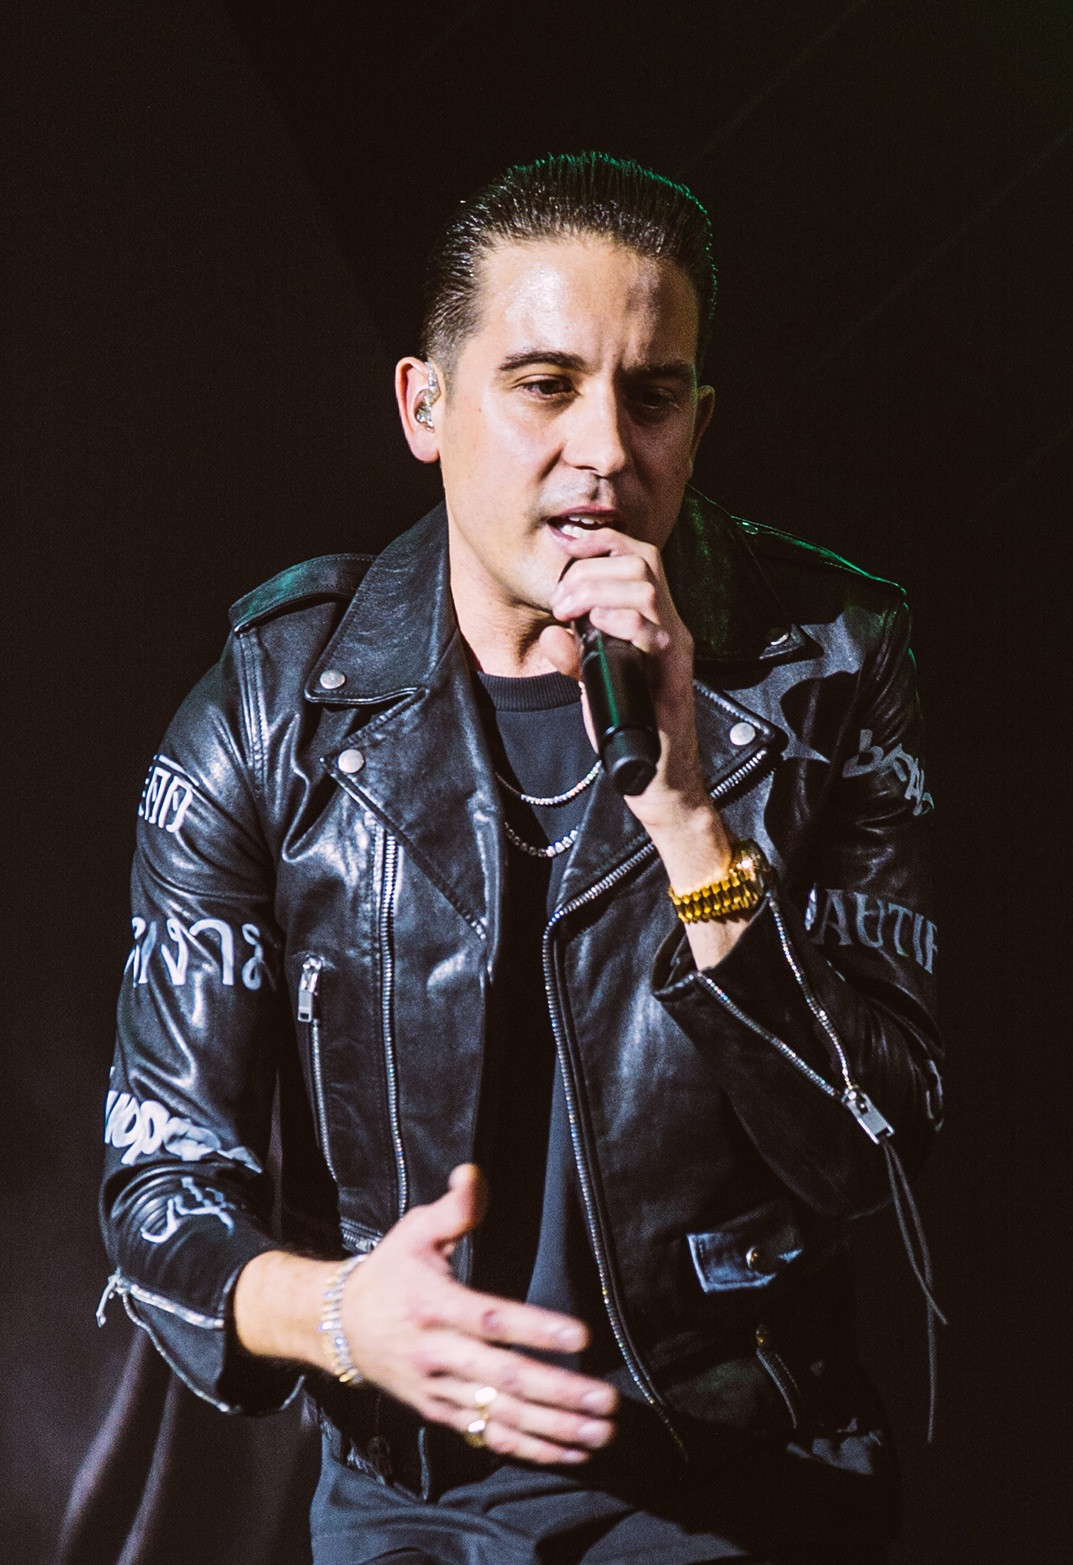 Rapper G Eazy named as suspect on NYPD assault report